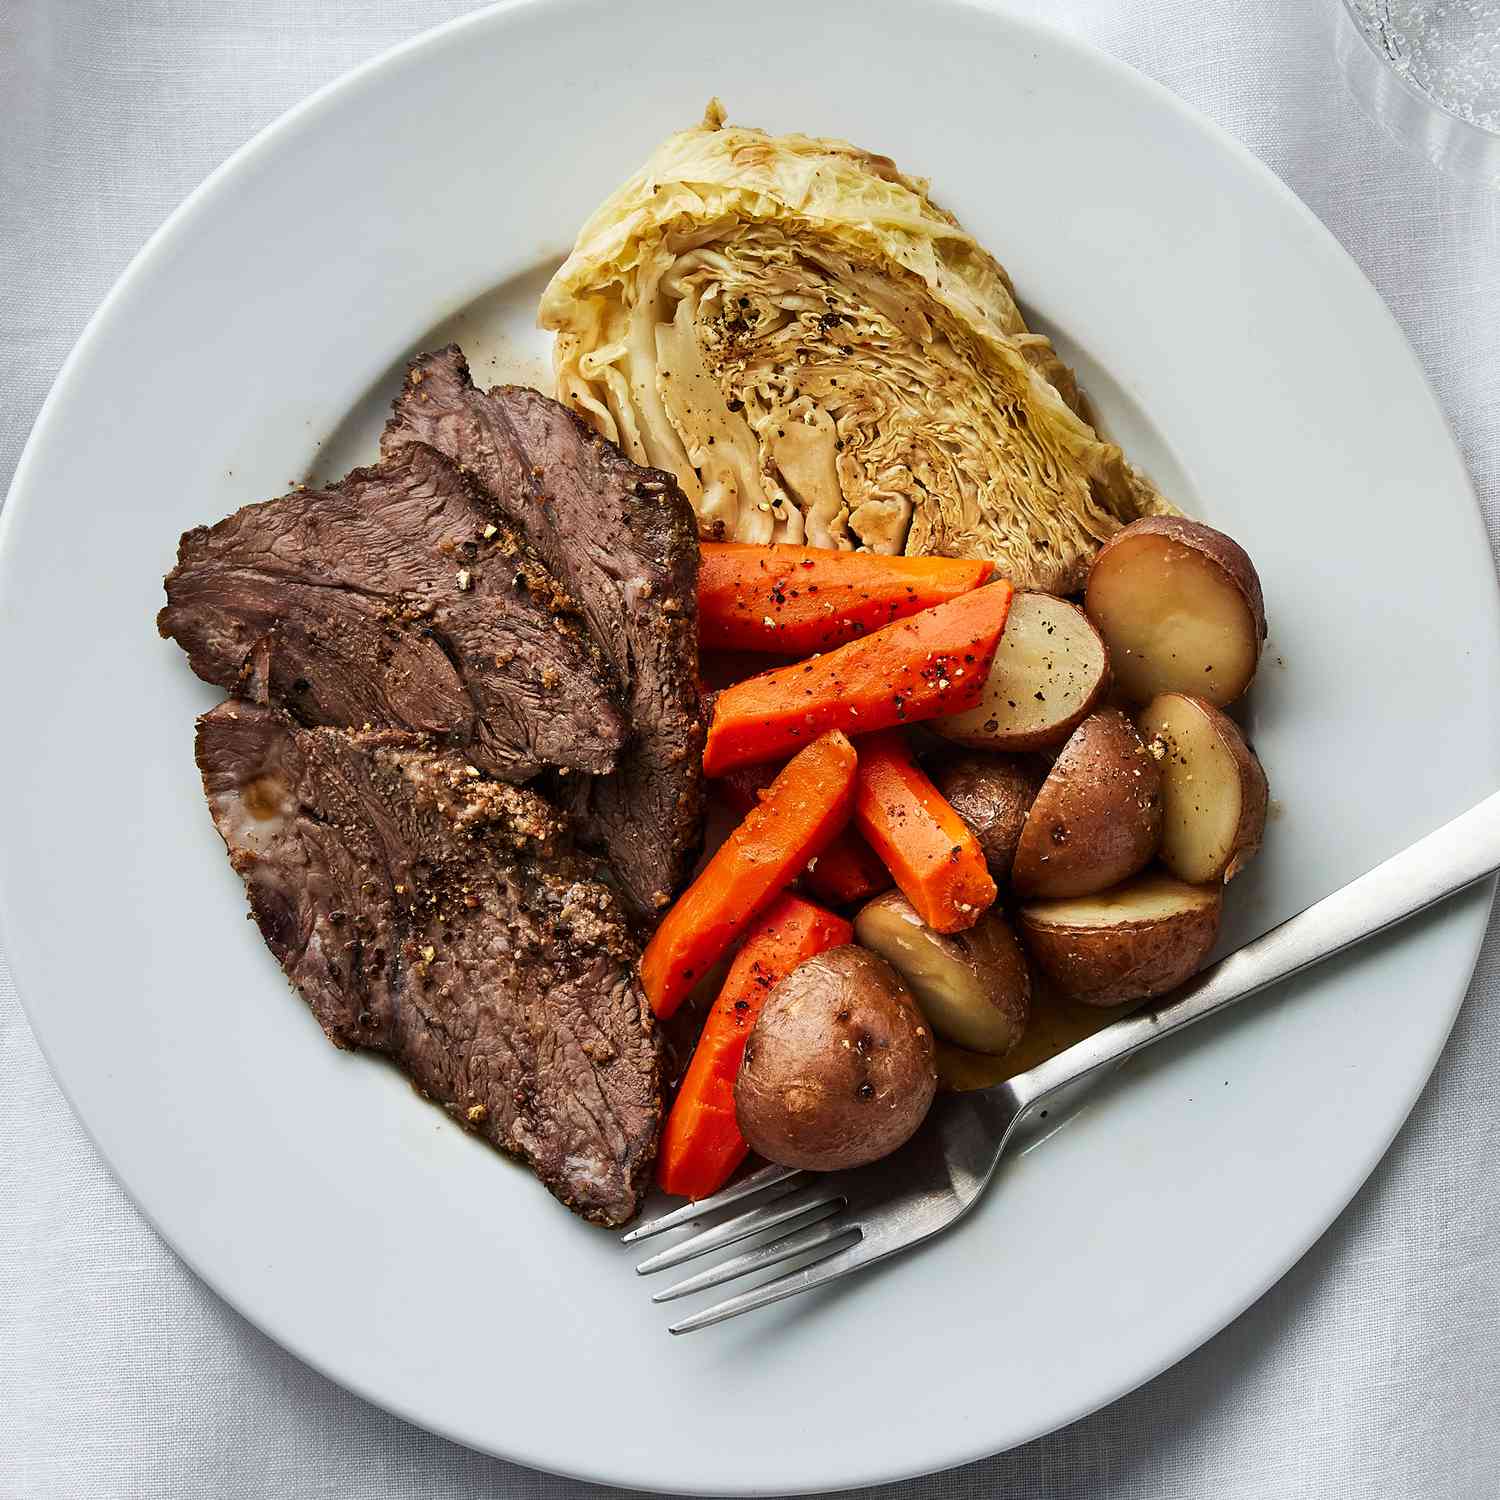 a recipe of the Baked Corned Beef & Cabbage served on a plate